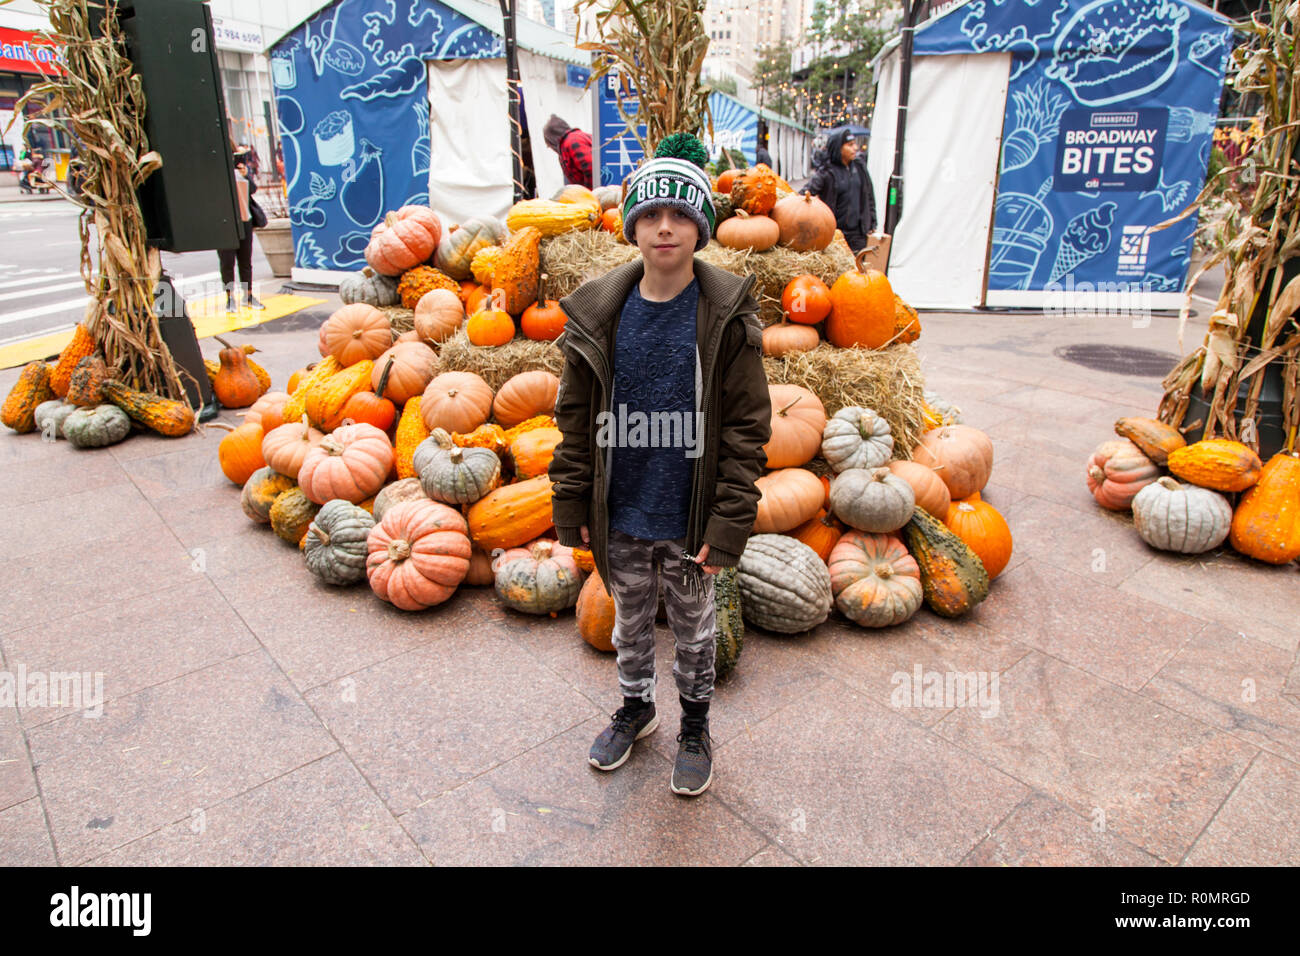 Pumpkin display at Broadway Bites a pop-up in summer and fall, Greeley Square, showcasing a diverse mix of cuisines from local chefs, New York, U.S.A Stock Photo